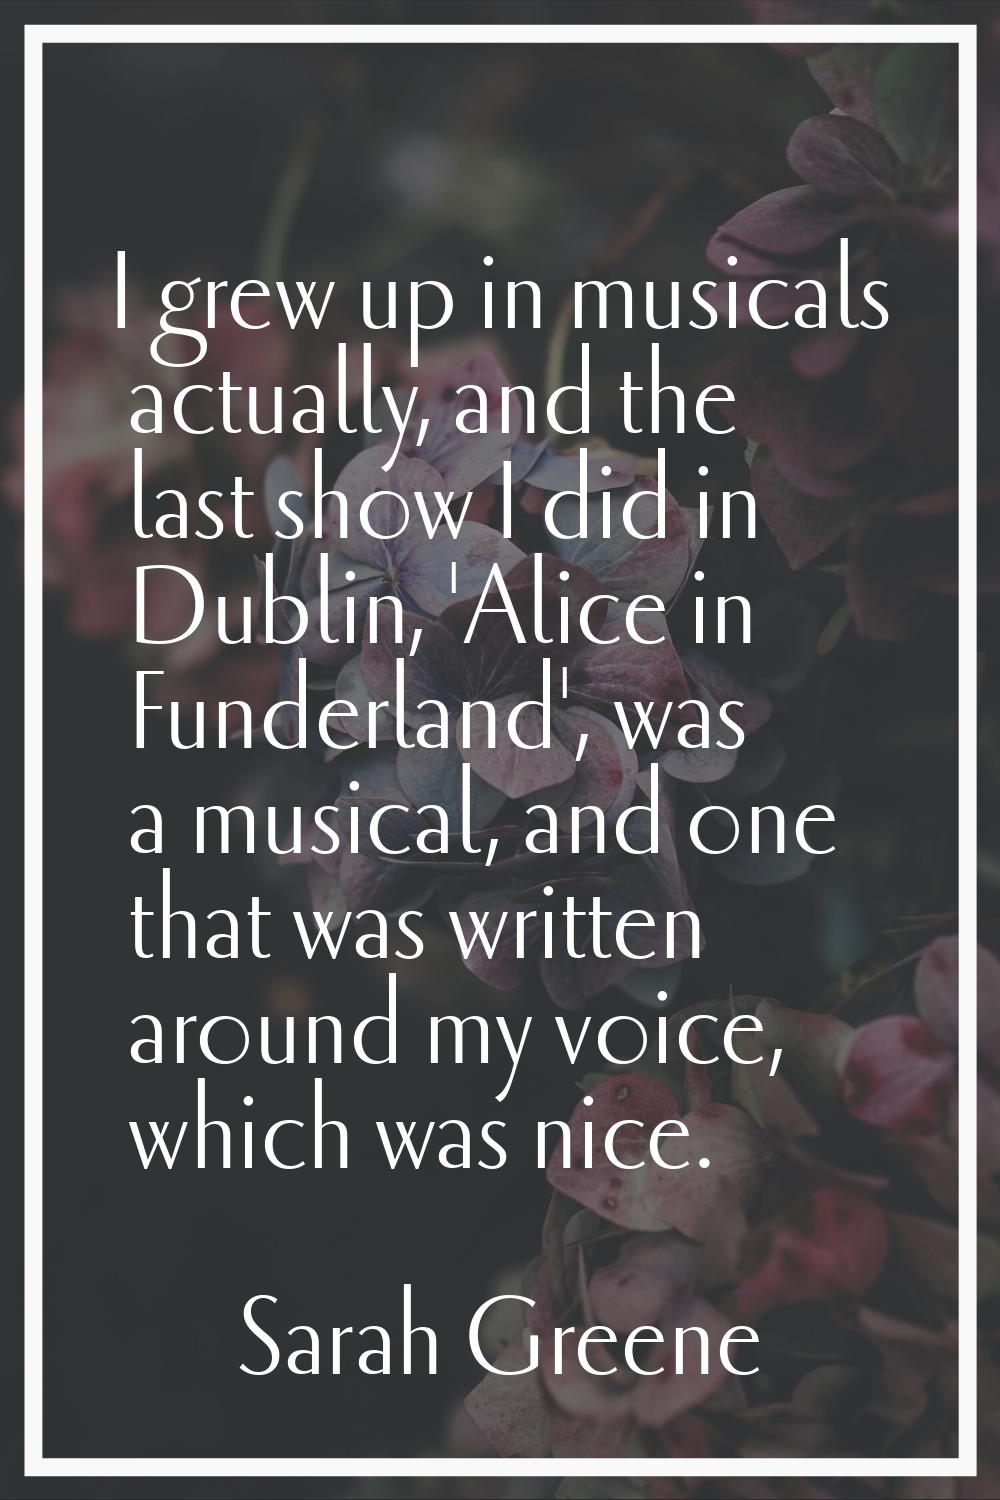 I grew up in musicals actually, and the last show I did in Dublin, 'Alice in Funderland', was a mus